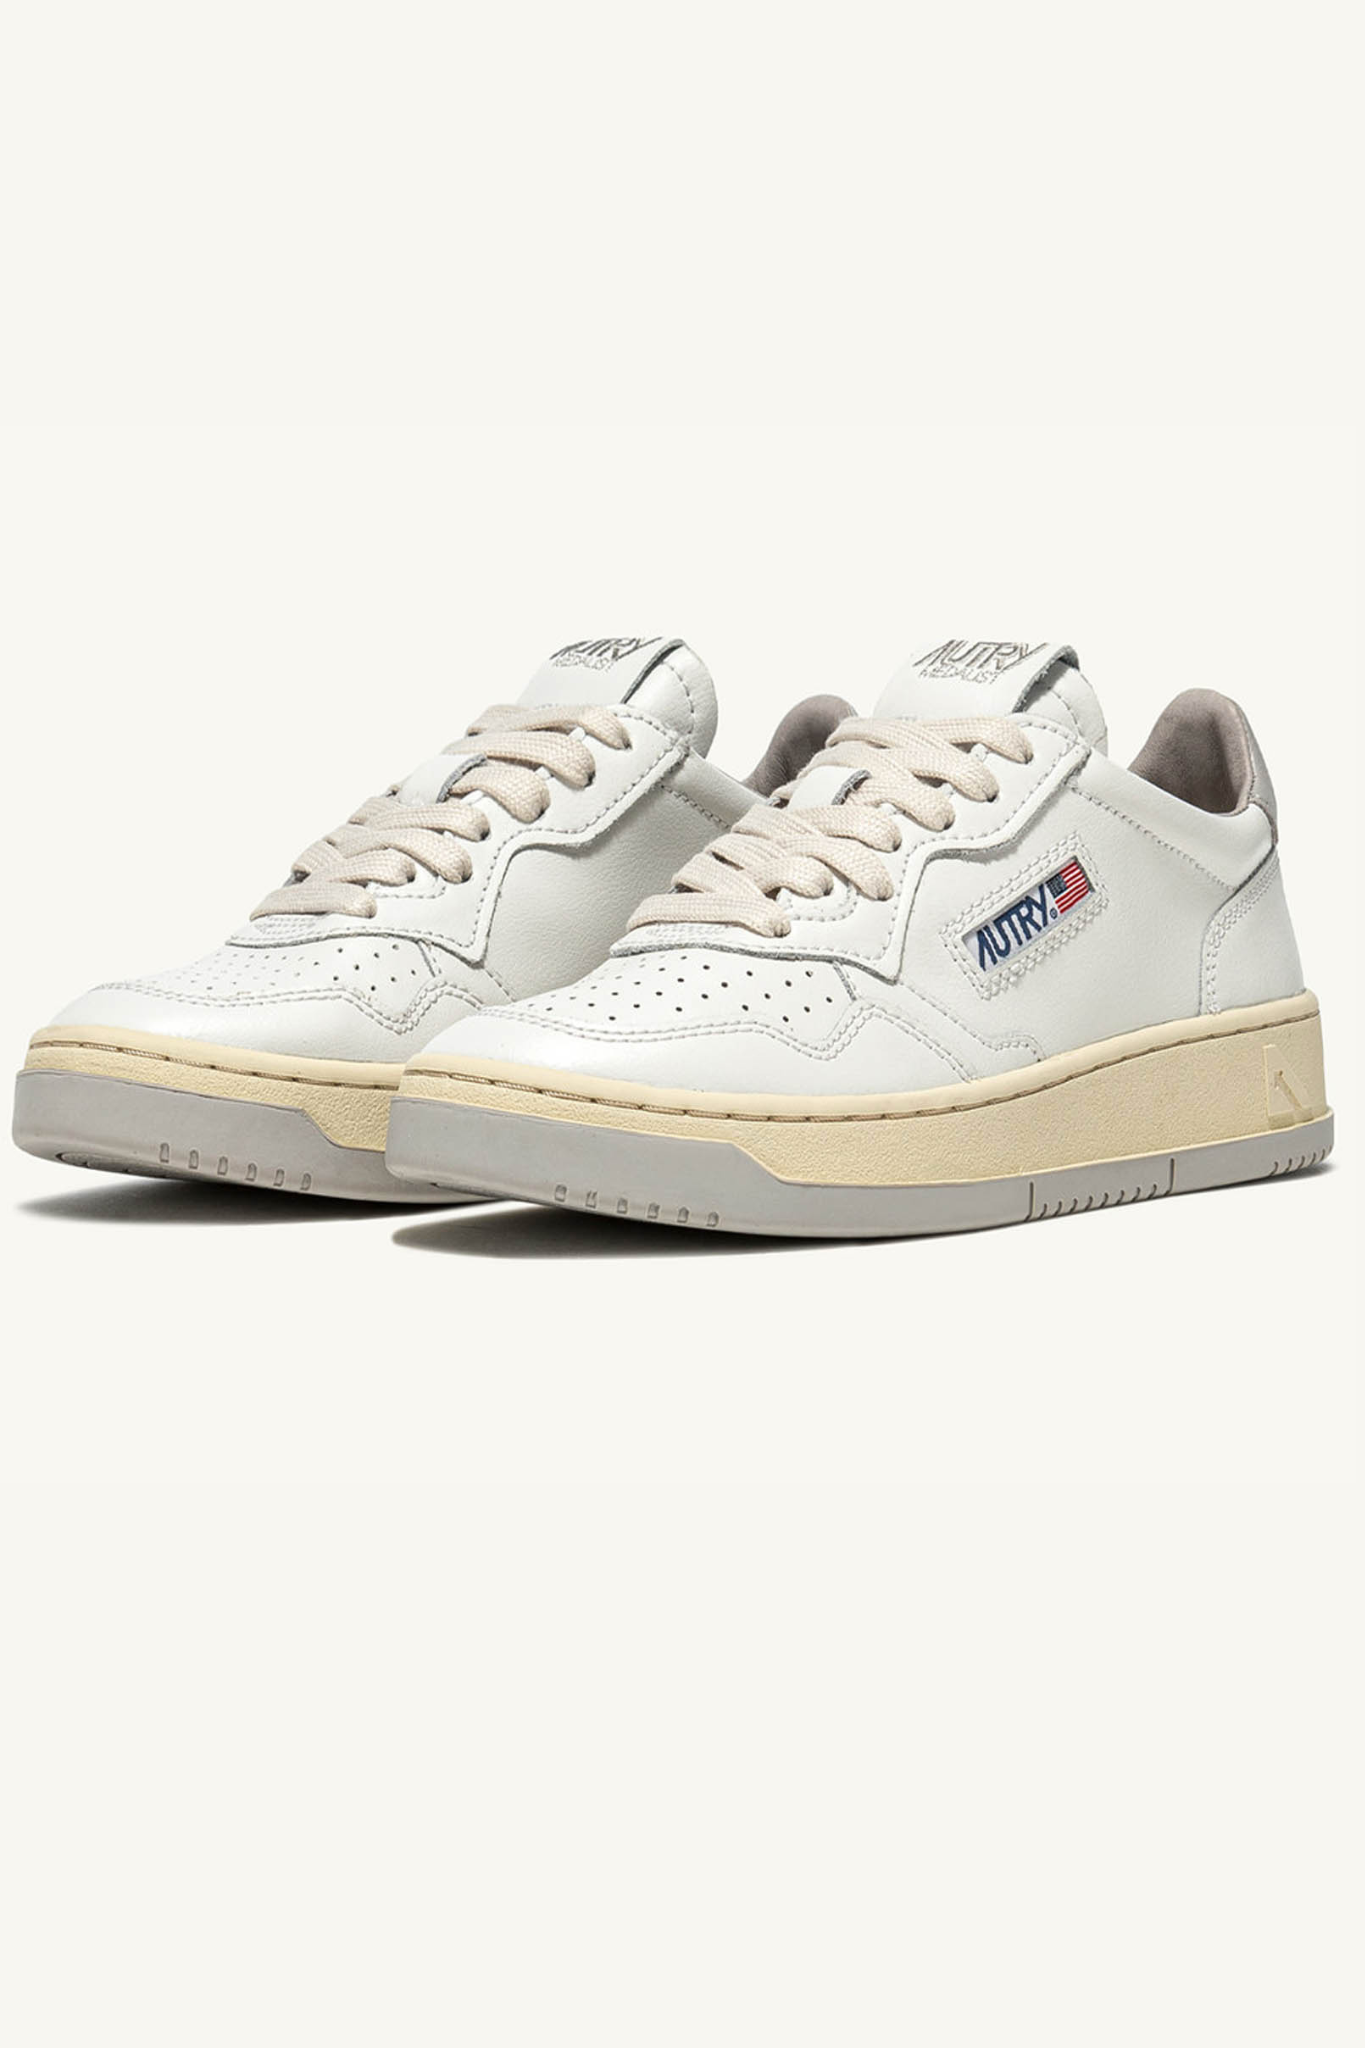 AULM-BB50 - MEDALIST LOW SNEAKERS IN LEATHER COLOR WHITE AND VAPOR